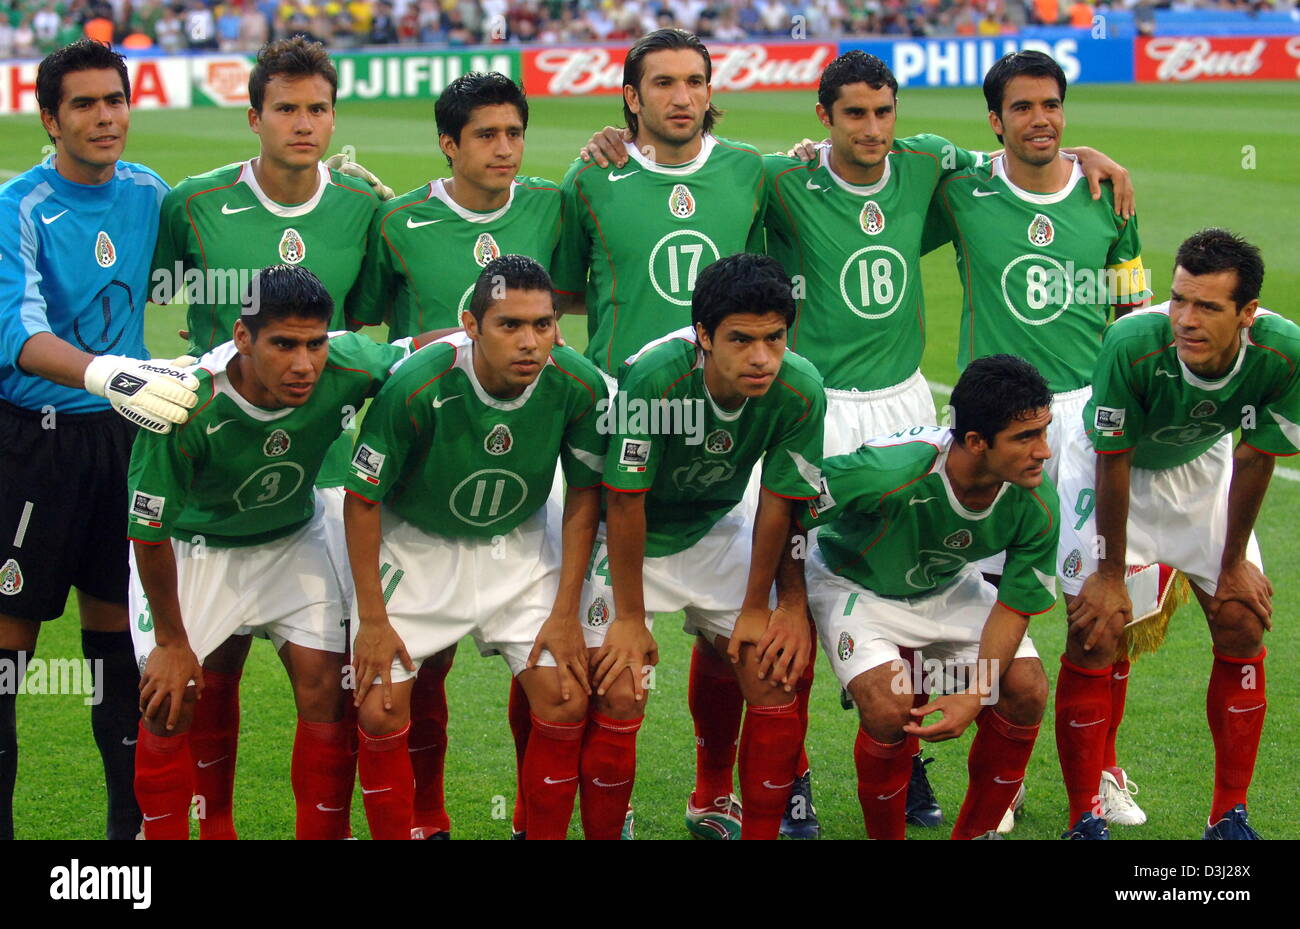 (dpa) - The picture shows the Mexican National soccer team before the match against Barzil at the FIFA Confederations Cup 2005 in Hanover, Germany, 19 June 2005. Mexico won the match 1-0. In the back row stand Oswaldo Sanchez, Aaron Galindo, Ricardo Osorio, Jose Fonseca, Salvador Carmona and Pavel Pardo (L-R) and in the front row Carlos Salcido, Ramon Morales, Gonzalo Pineda, Zinha Stock Photo